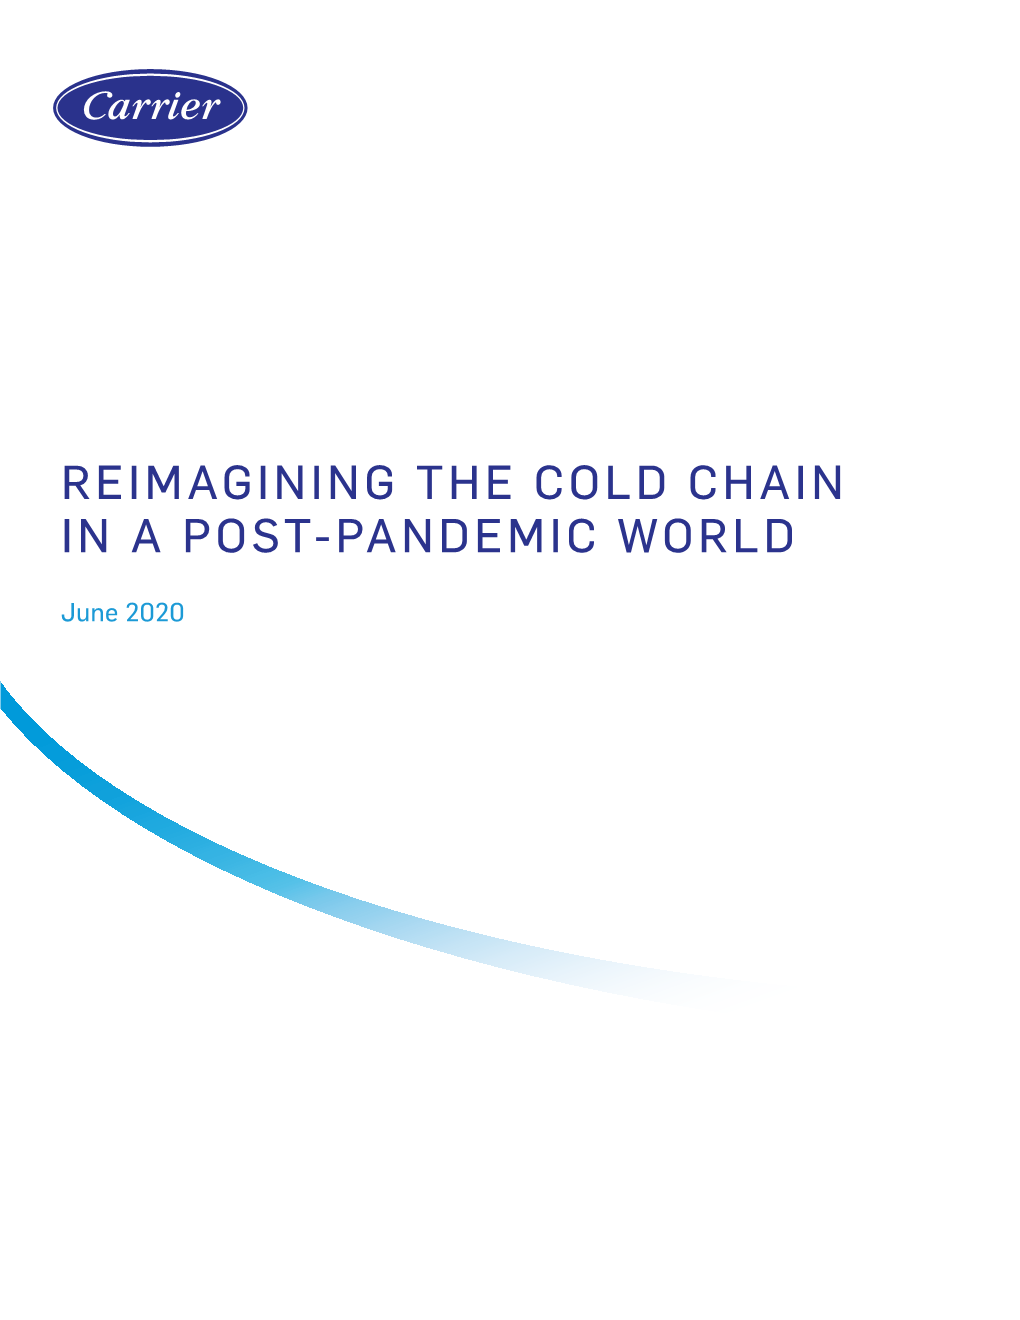 Reimagining the Cold Chain in a Post-Pandemic World